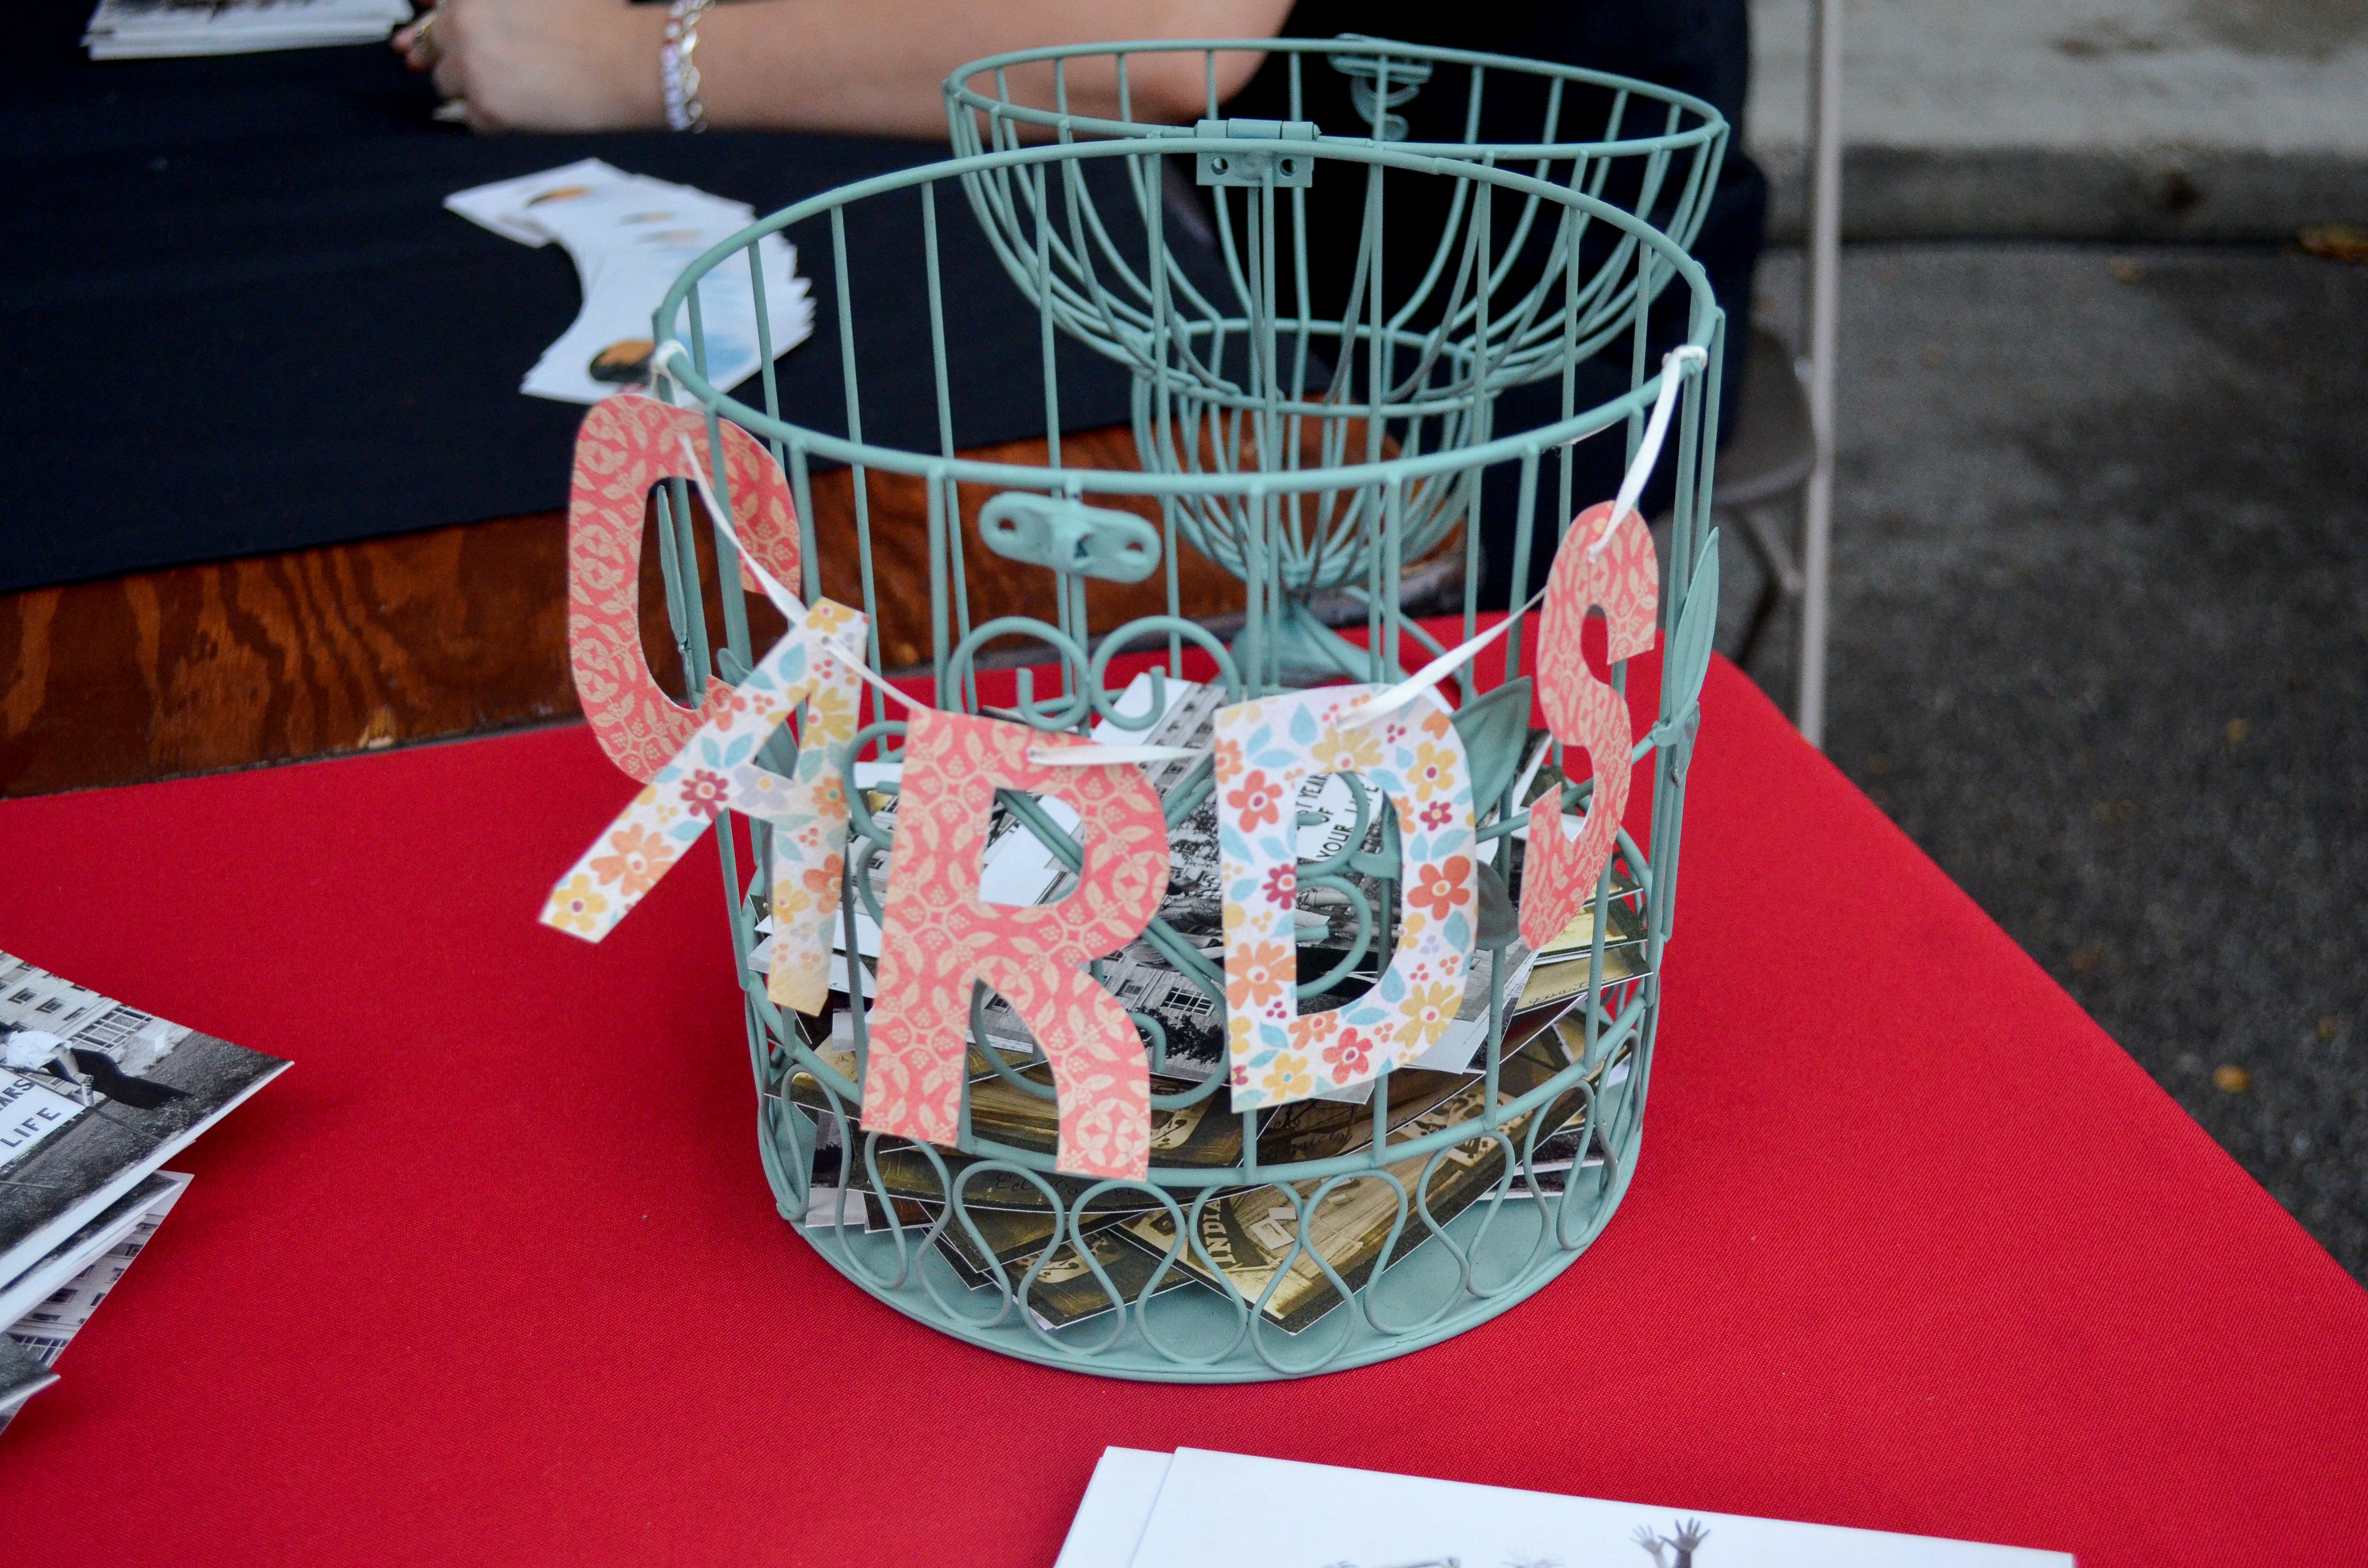 A decorative birdcage with a cut-out sign reading "CARDS" sits on a table. The birdcage is full of postcards.